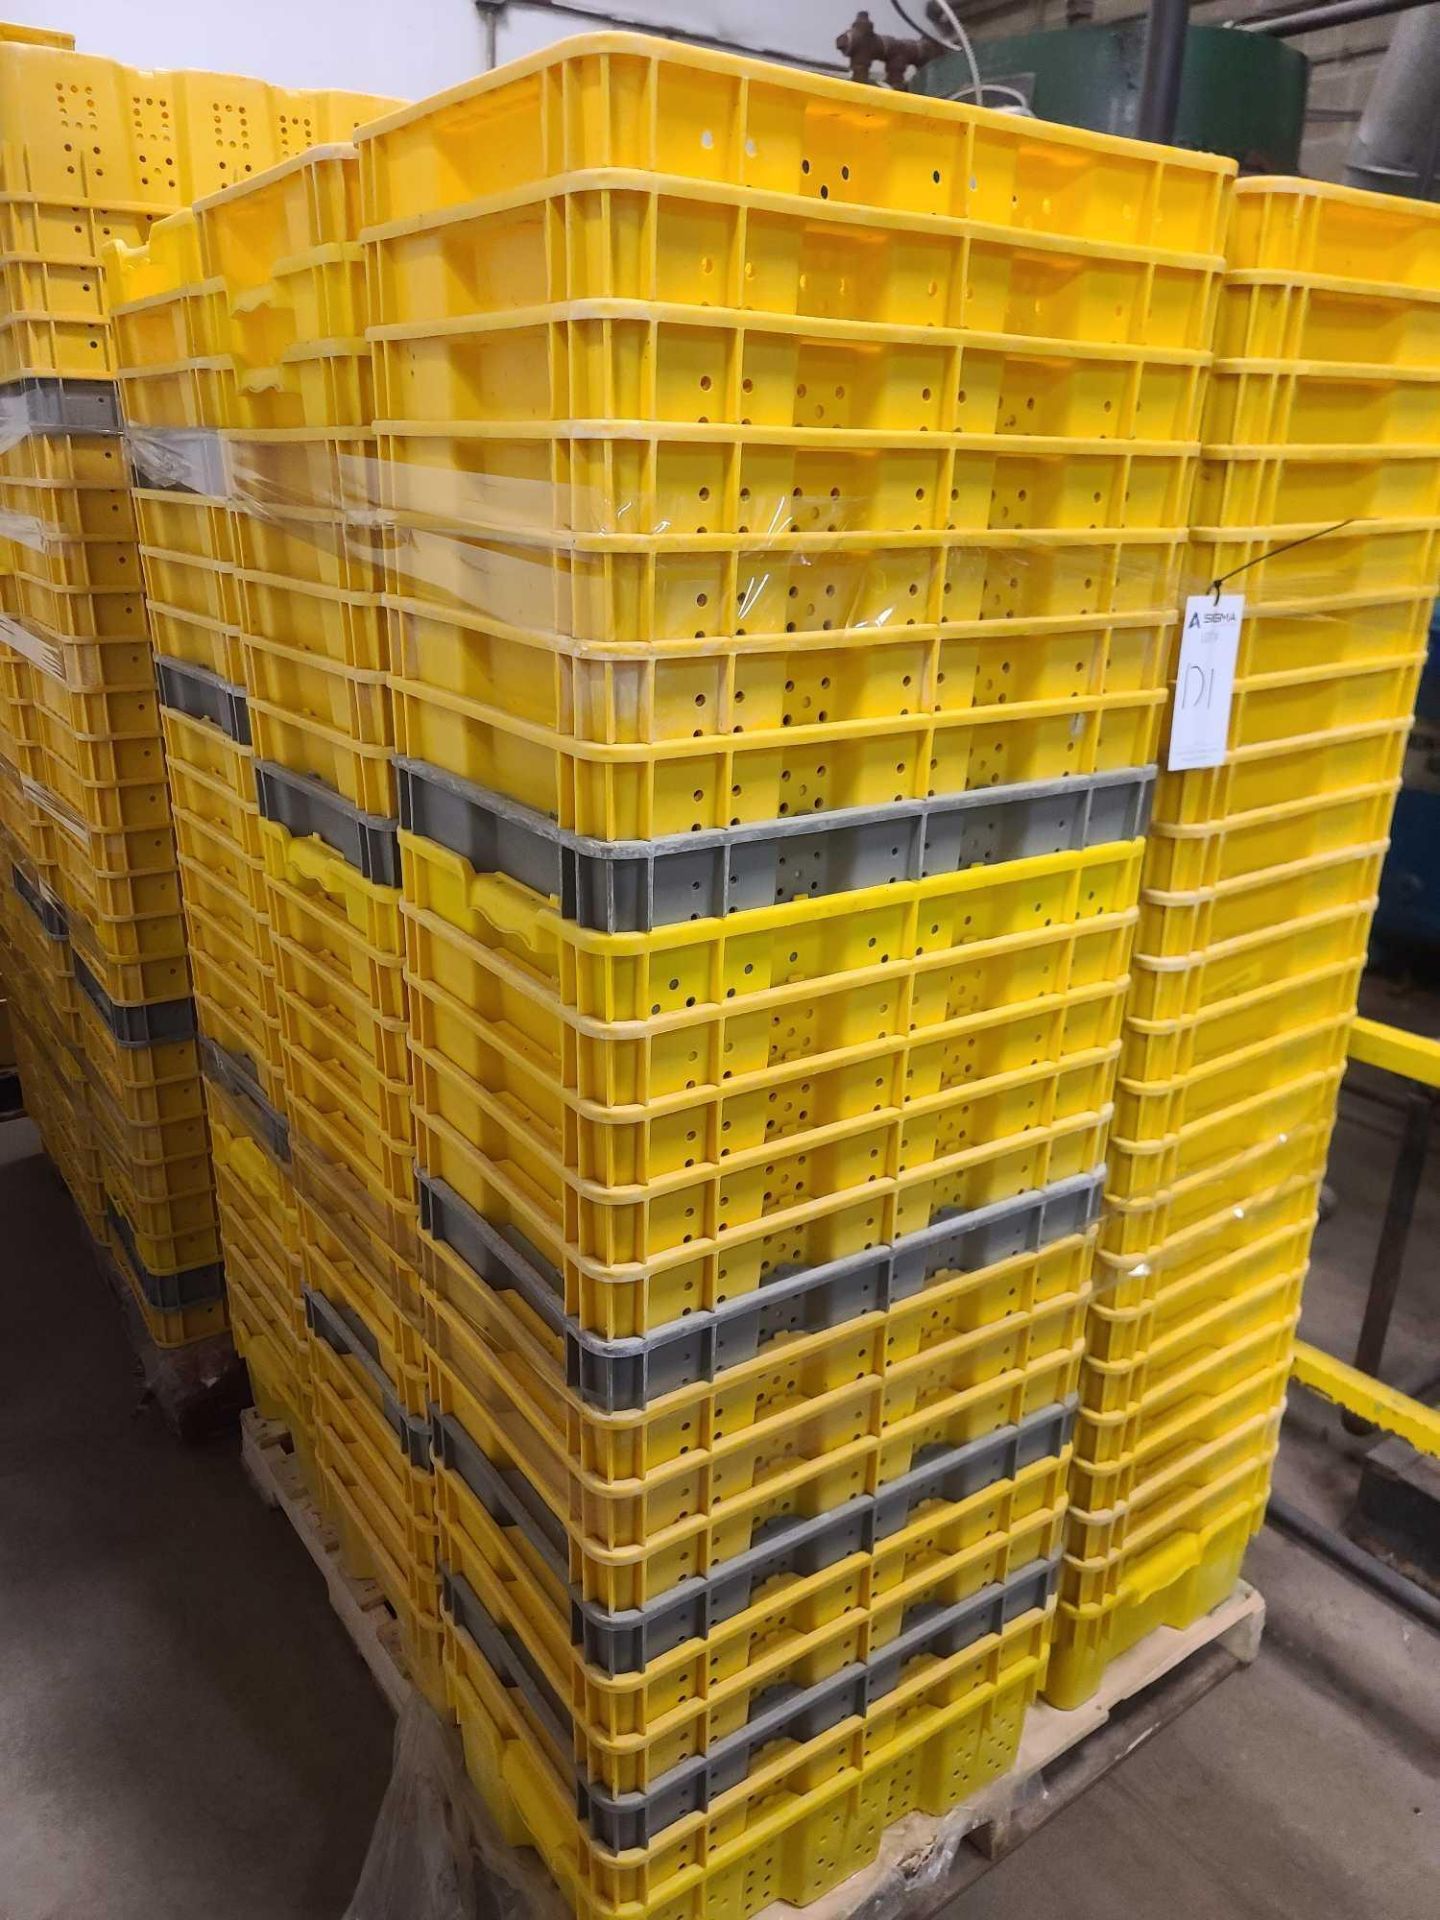 Pallet of Plastic Produce Bins - Image 2 of 2